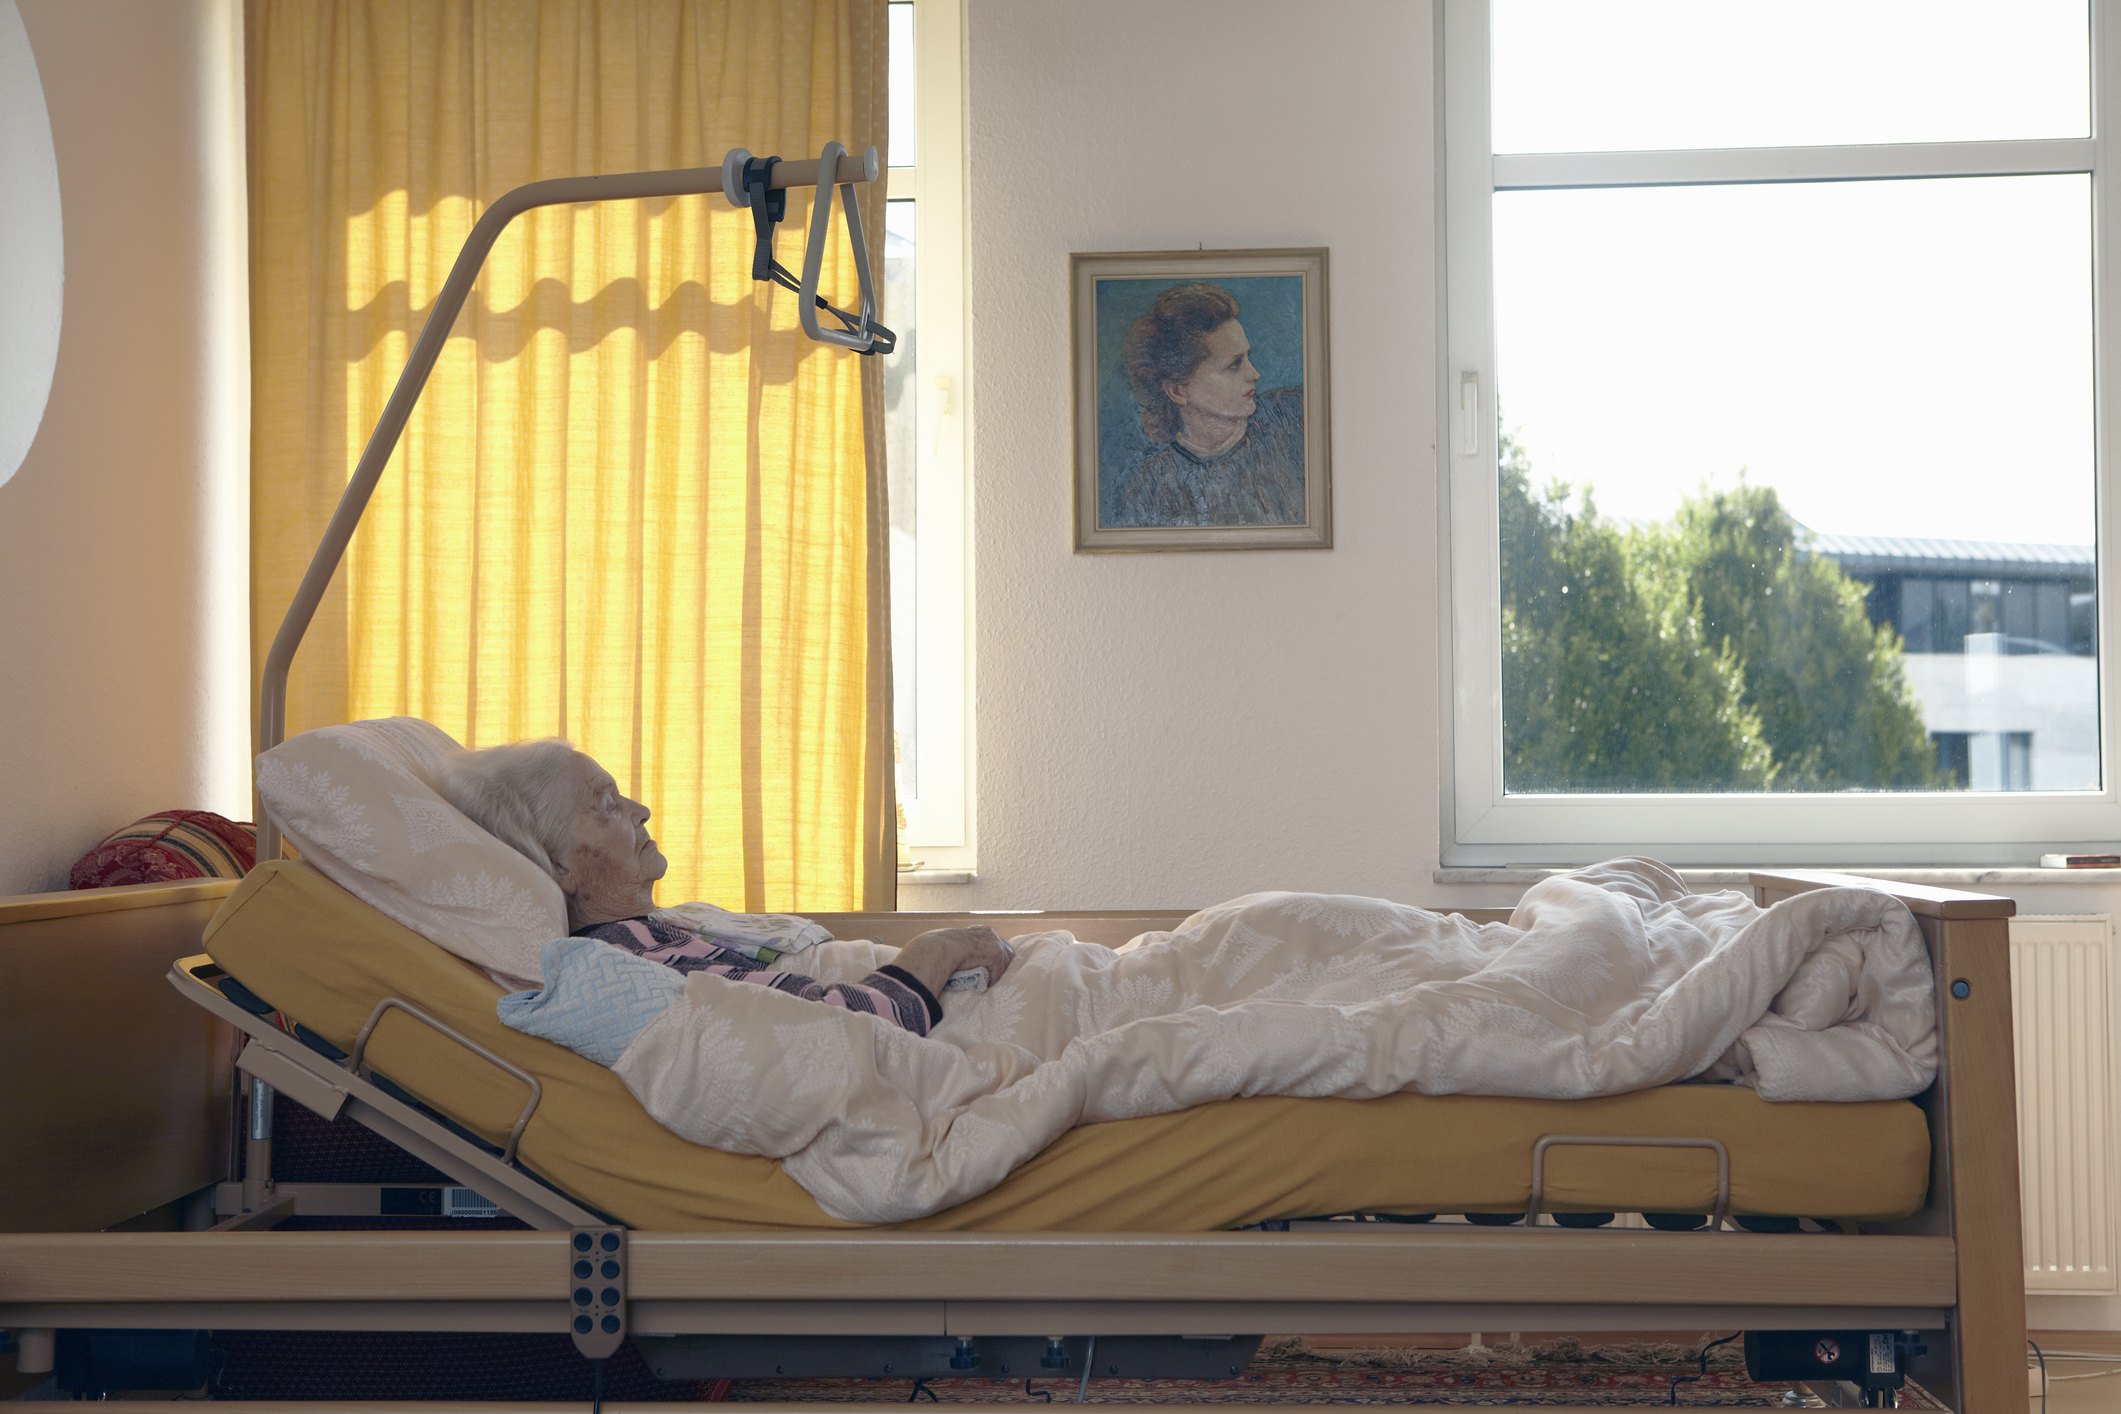 Older woman resting in a hospital bed by a window with a portrait on the wall